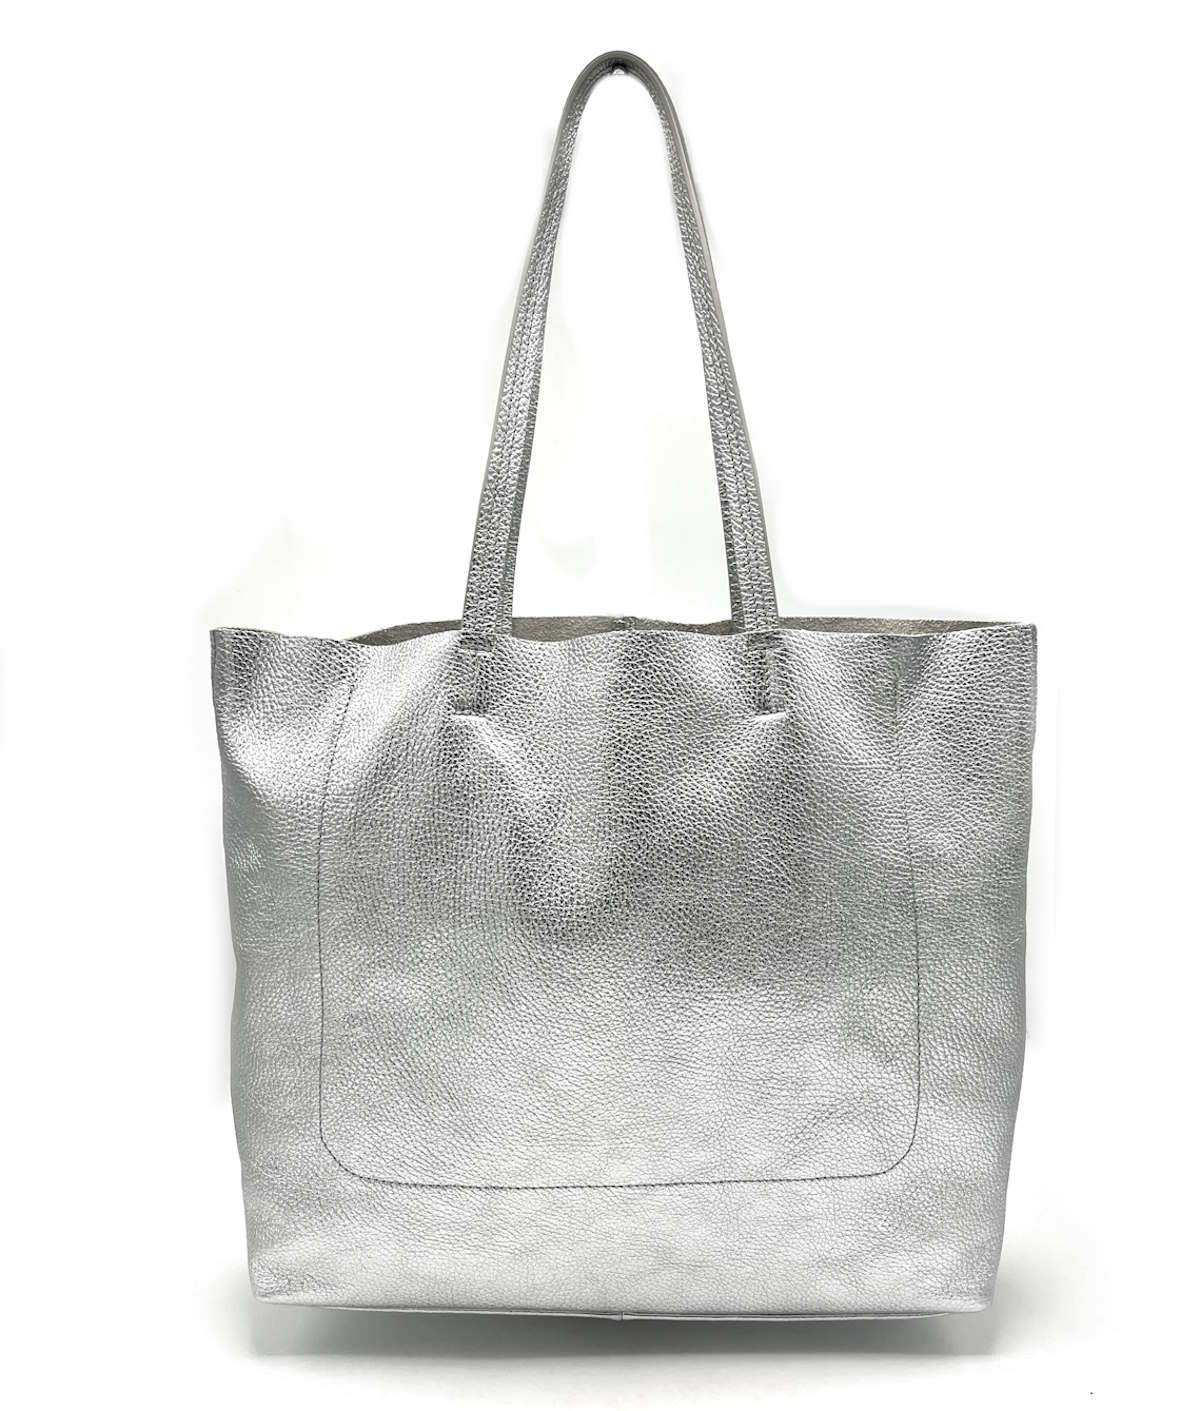 Genuine leather shopping bag, for women, Made in Italy, art. 112443/LA